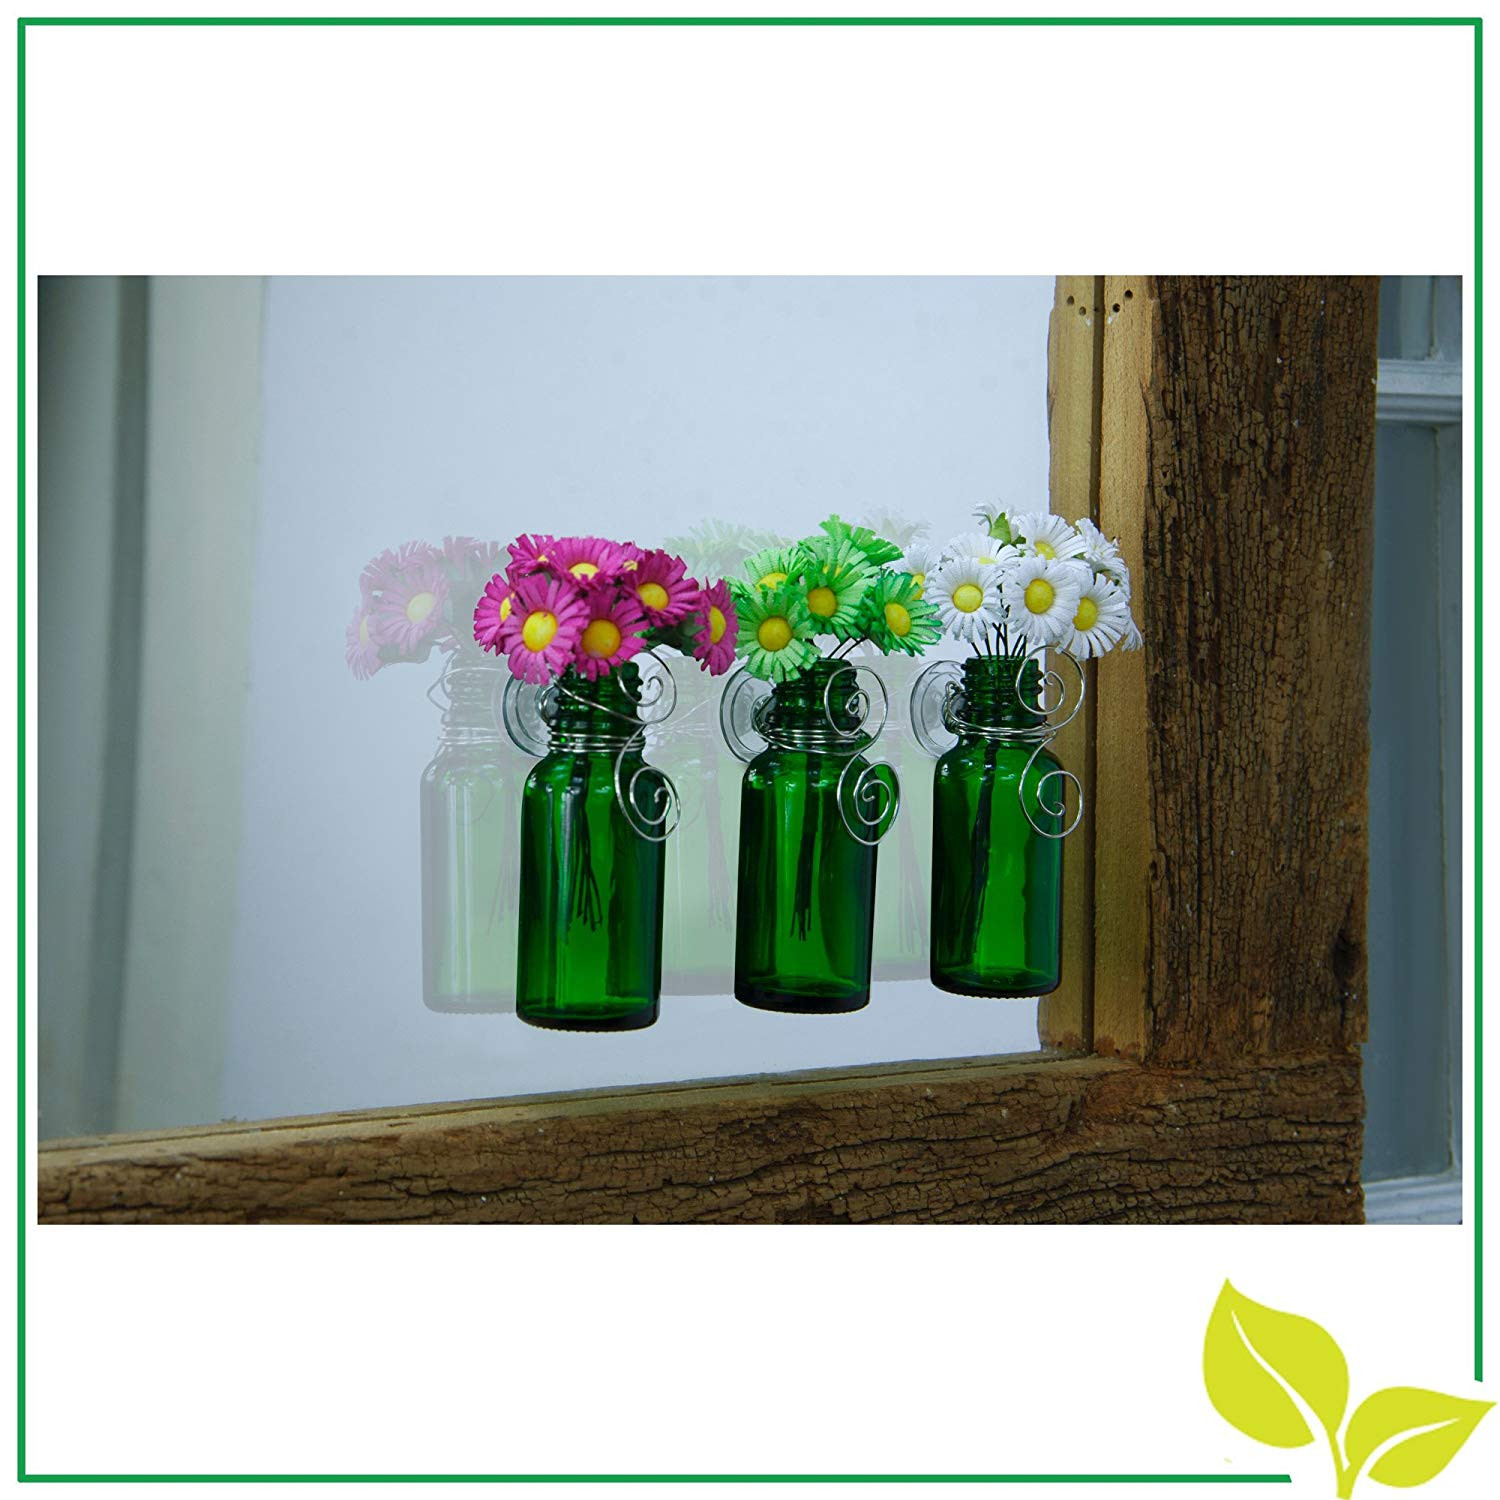 14 Stylish Flower Vase From Beauty and the Beast 2024 free download flower vase from beauty and the beast of vazzini mini vase bouquet suction cup bud bottle holder with in vazzini mini vase bouquet suction cup bud bottle holder with flowers decorative for w